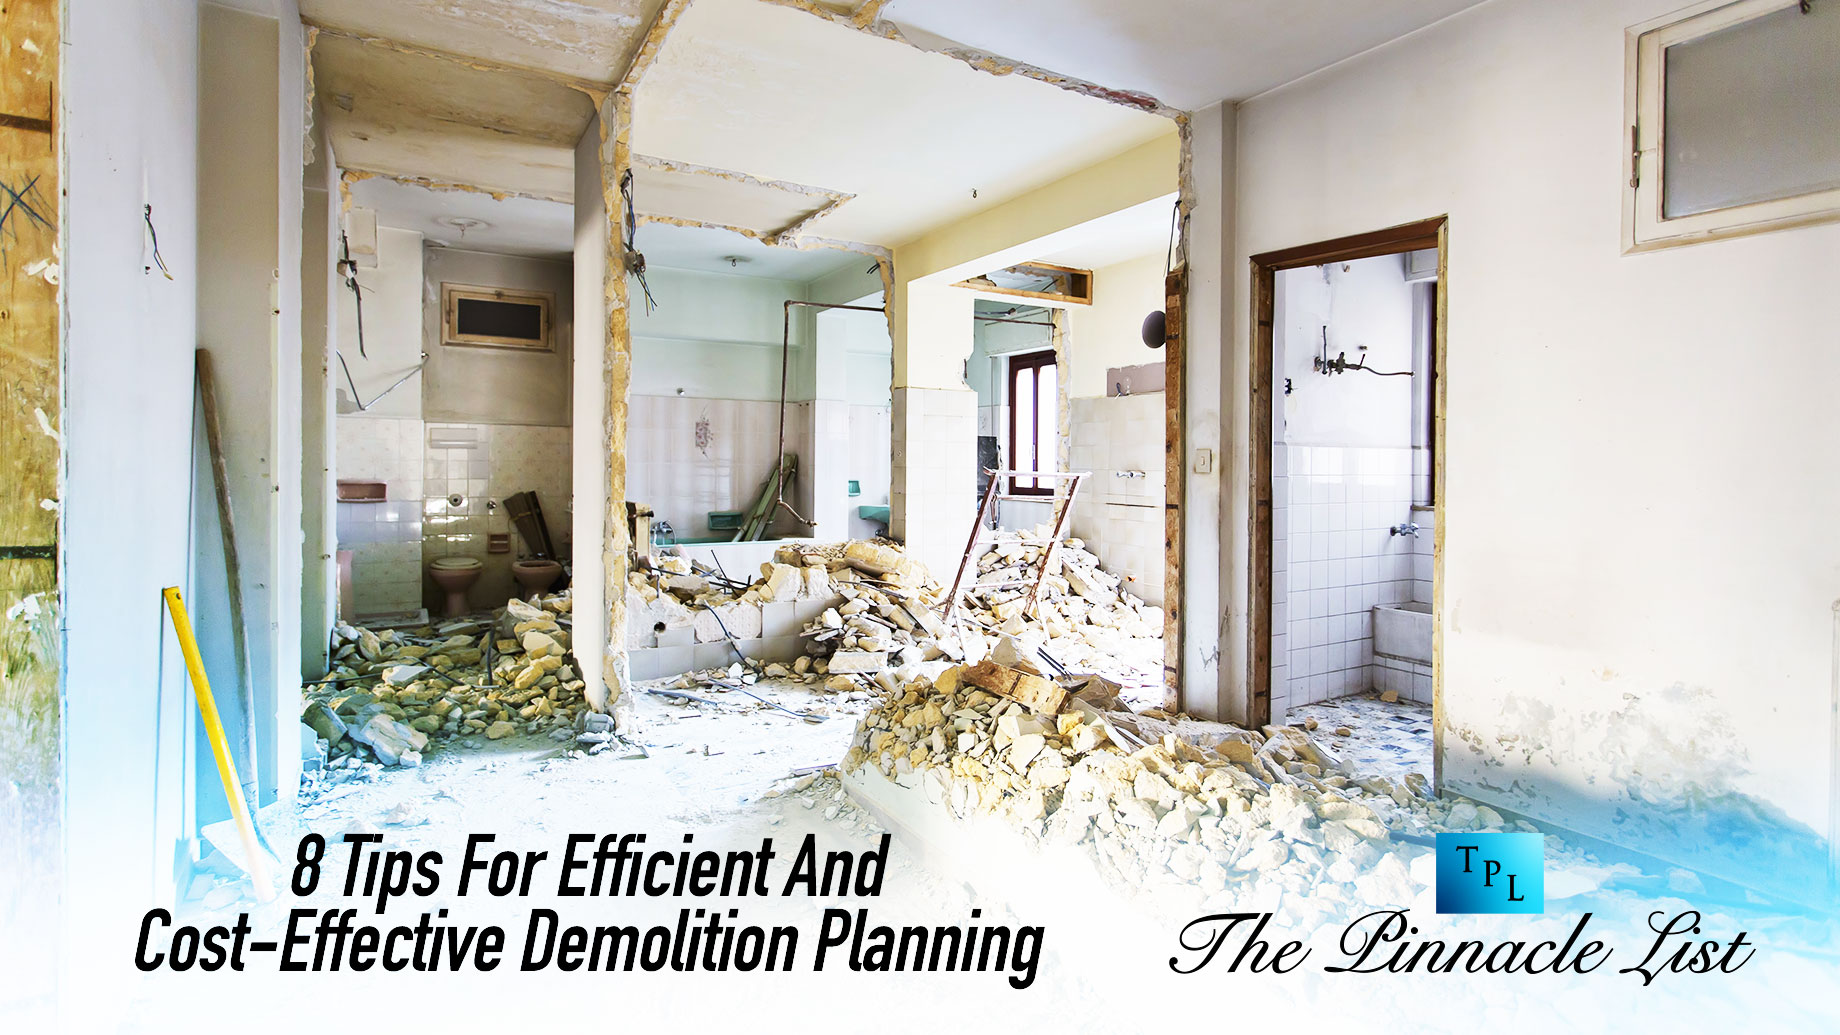 8 Tips For Efficient And Cost-Effective Demolition Planning